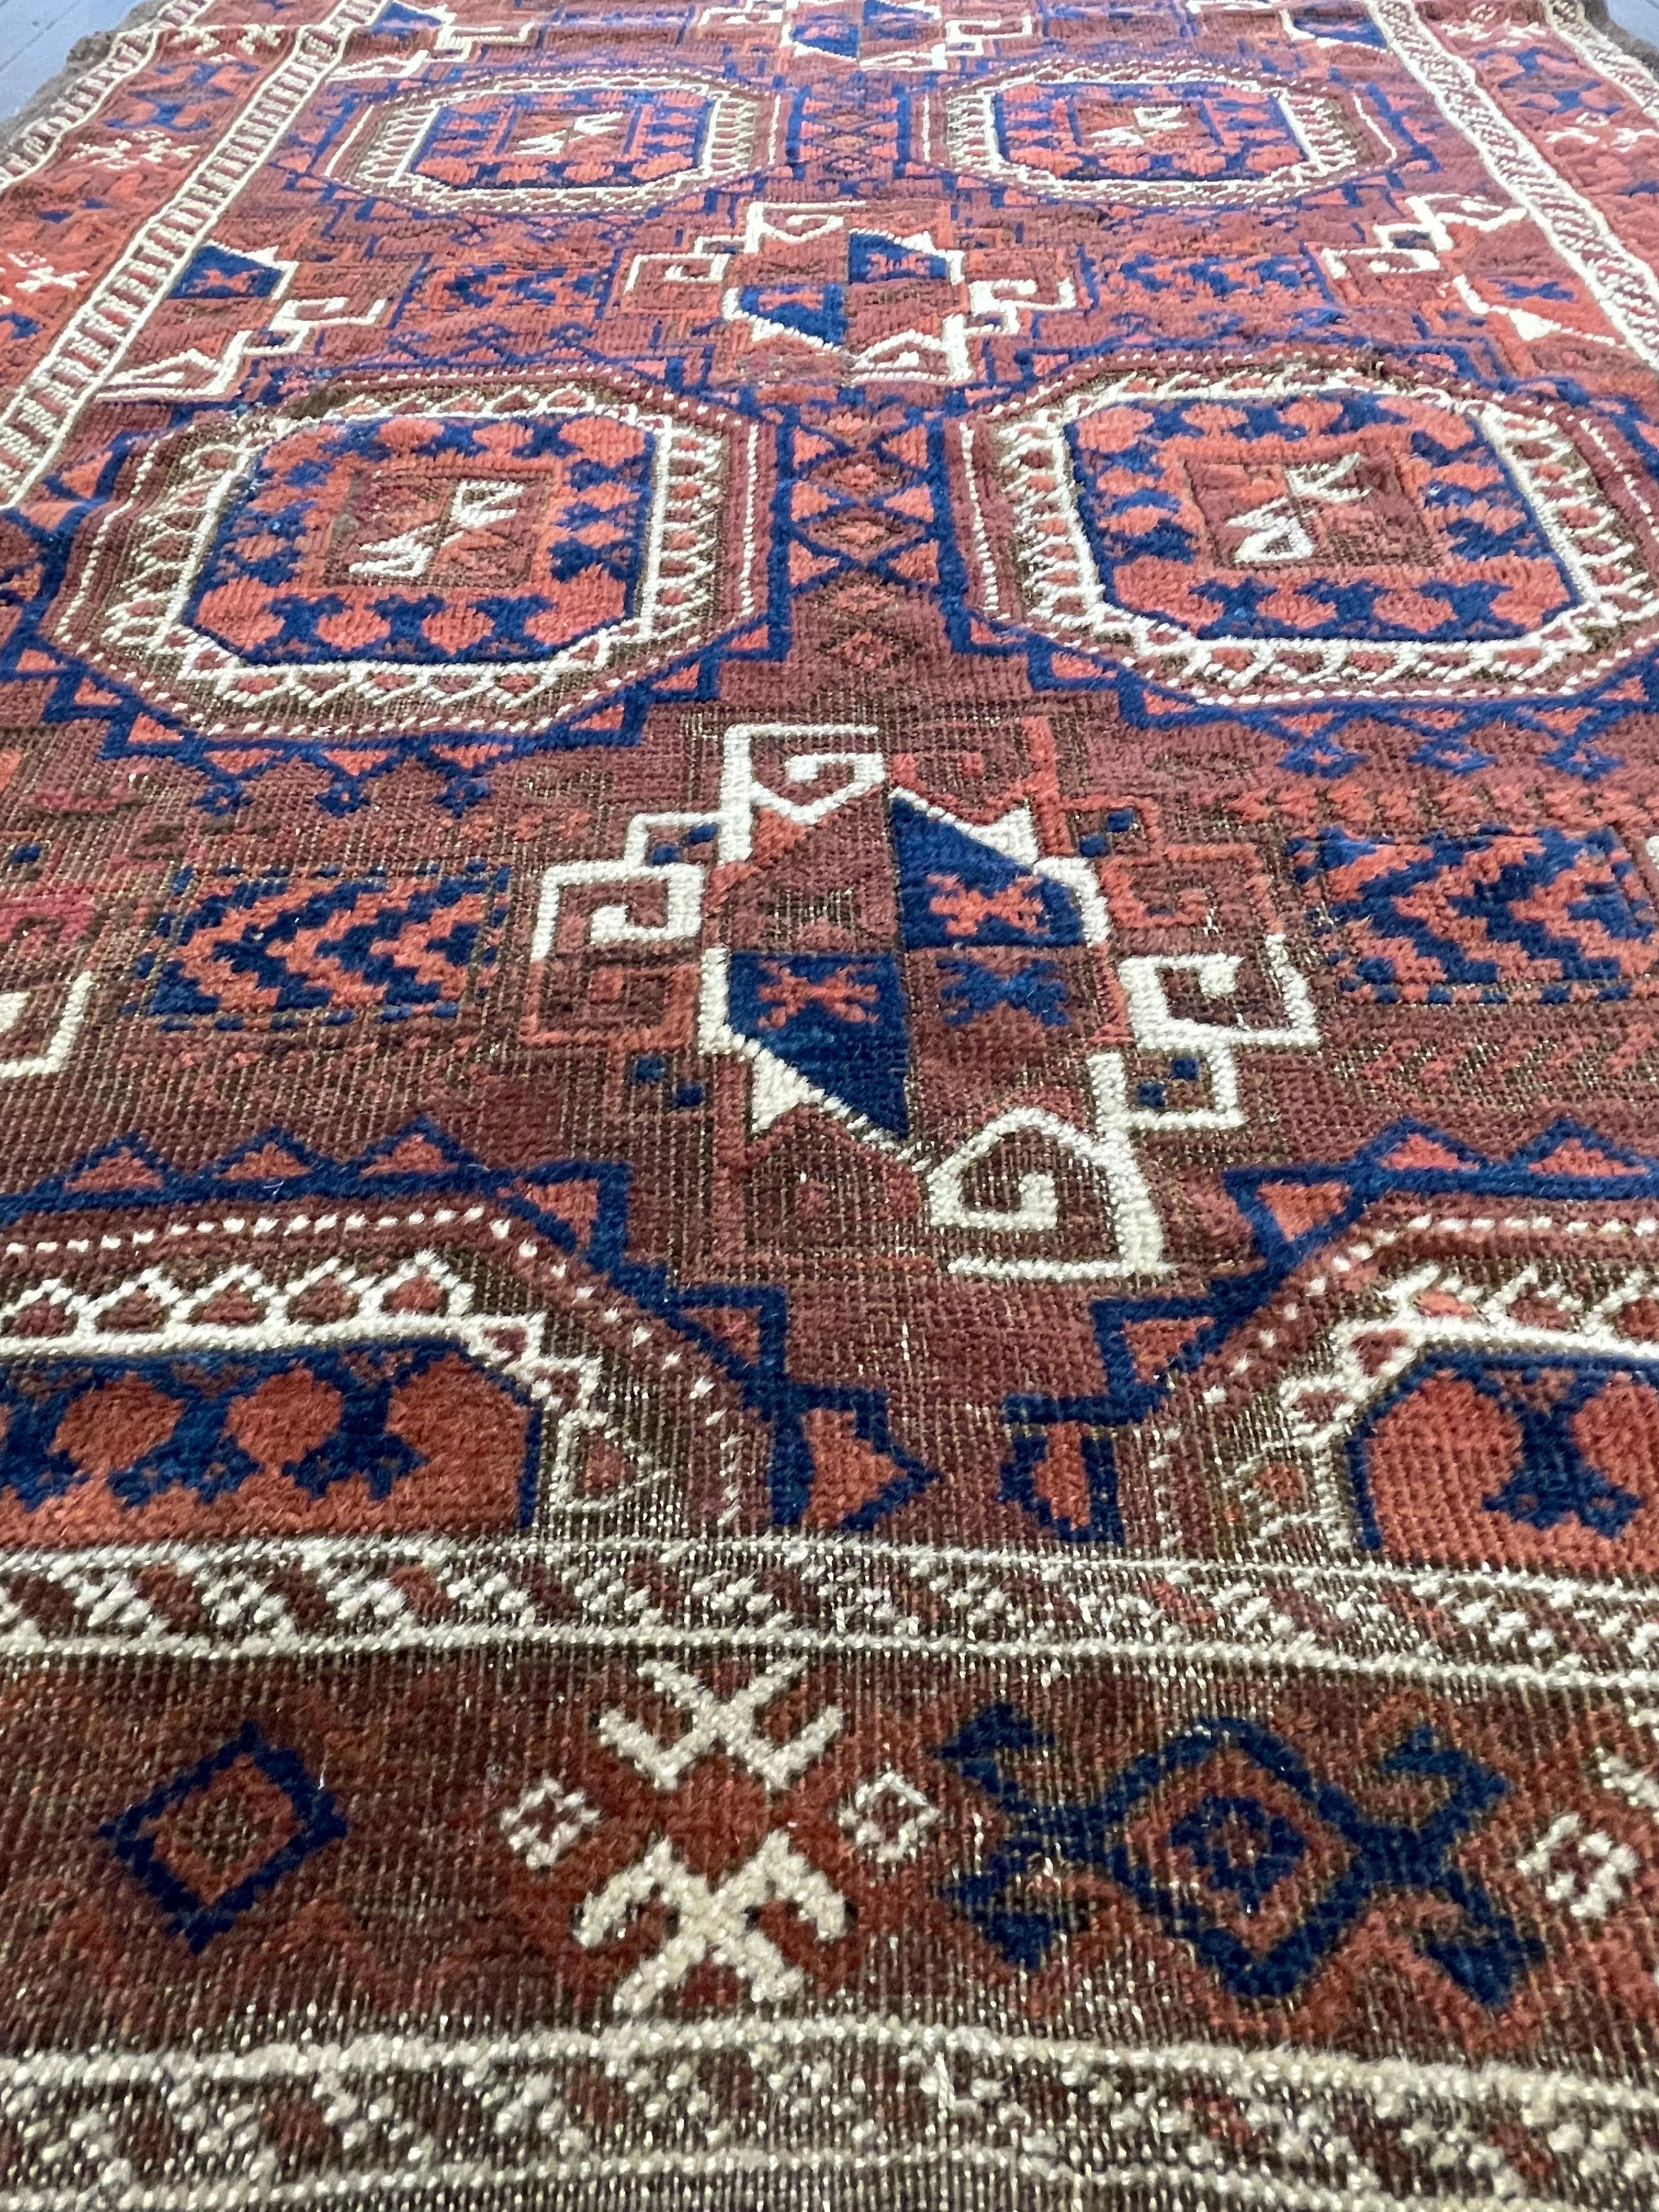 Early 20th Century Antique Persian Baluch Rug, circa 1900 For Sale